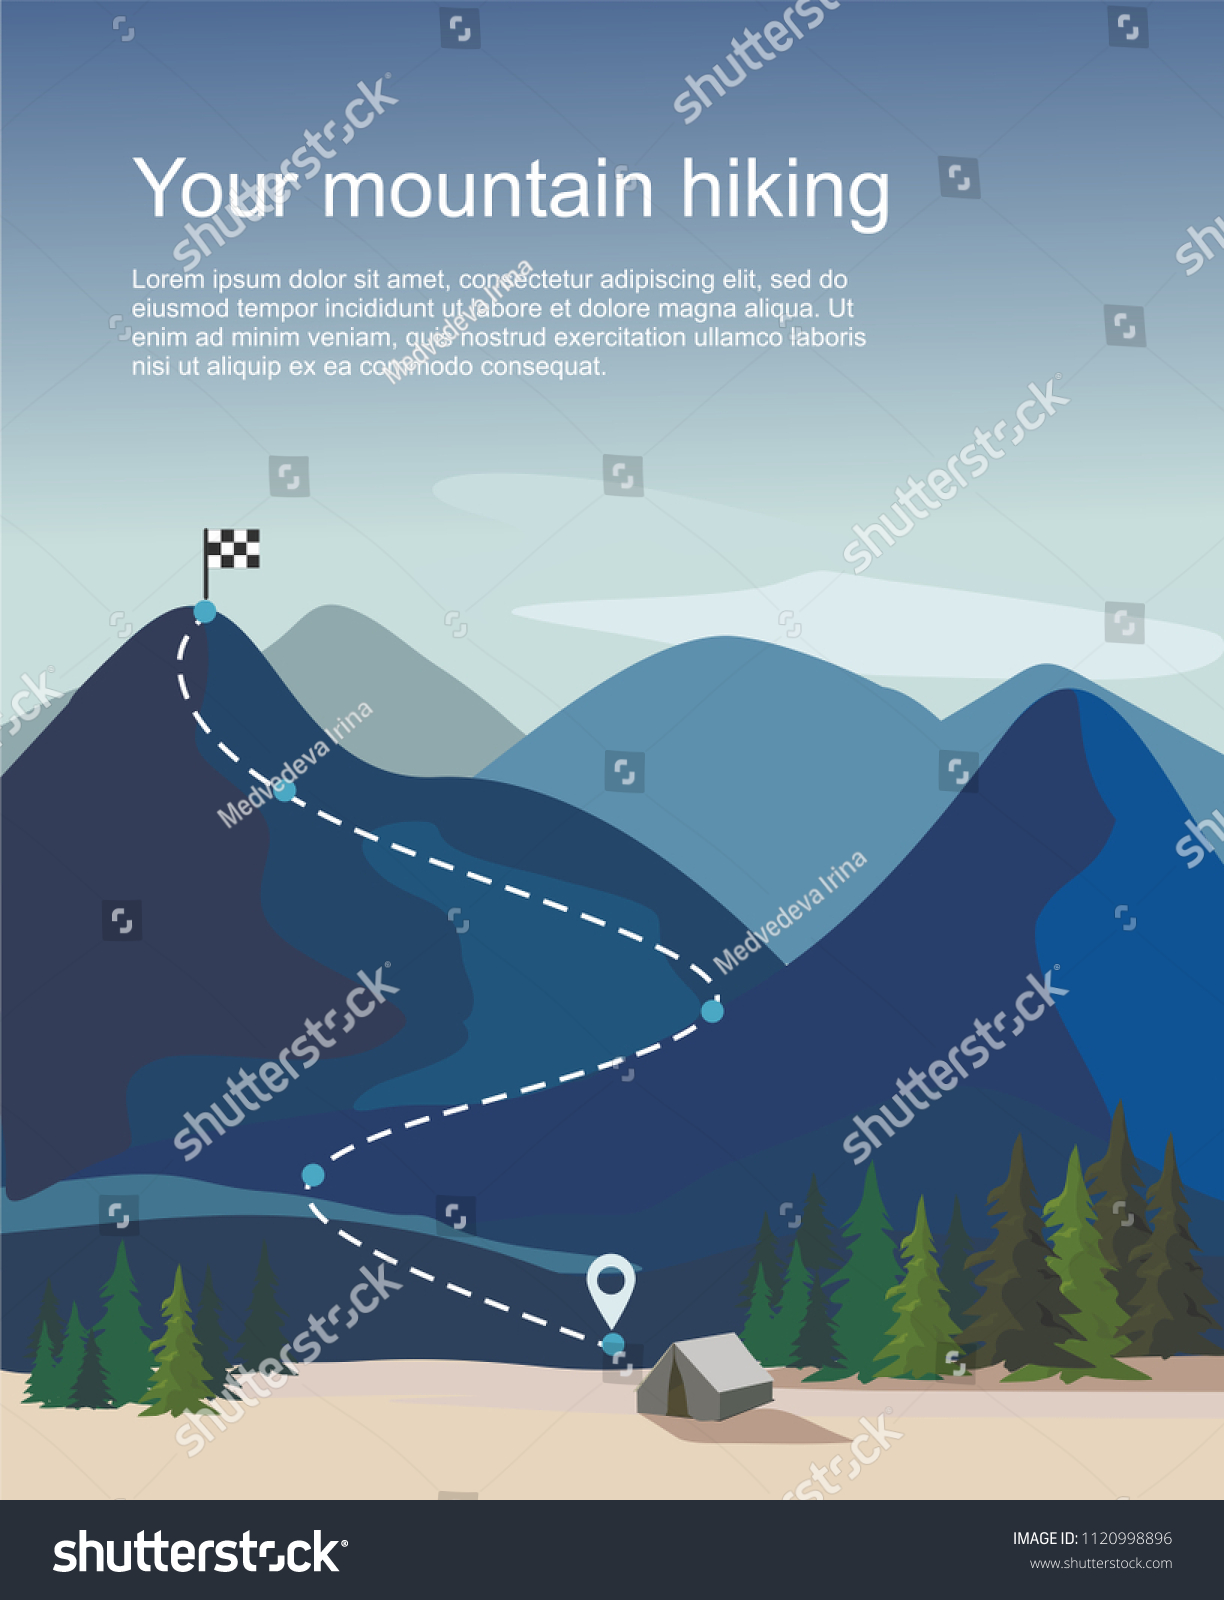 Hiking route infographic. Layers of mountain landscape with fir trees . Vector illustration #1120998896